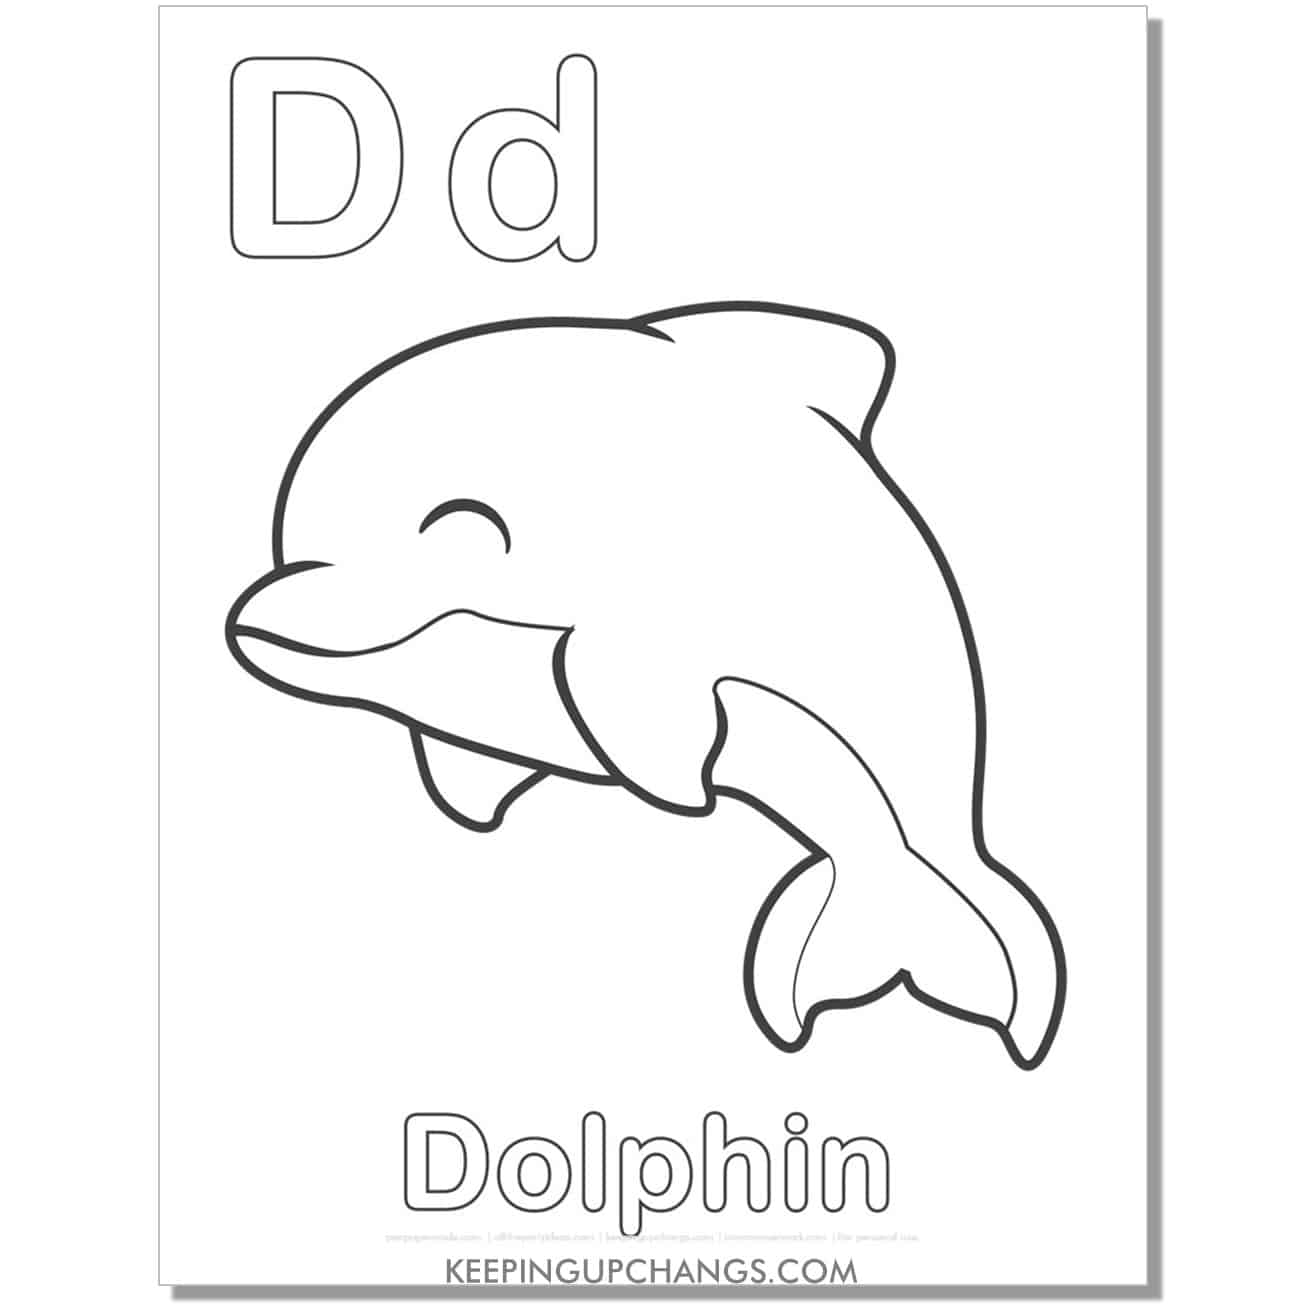 abc coloring sheet, d for dolphin.